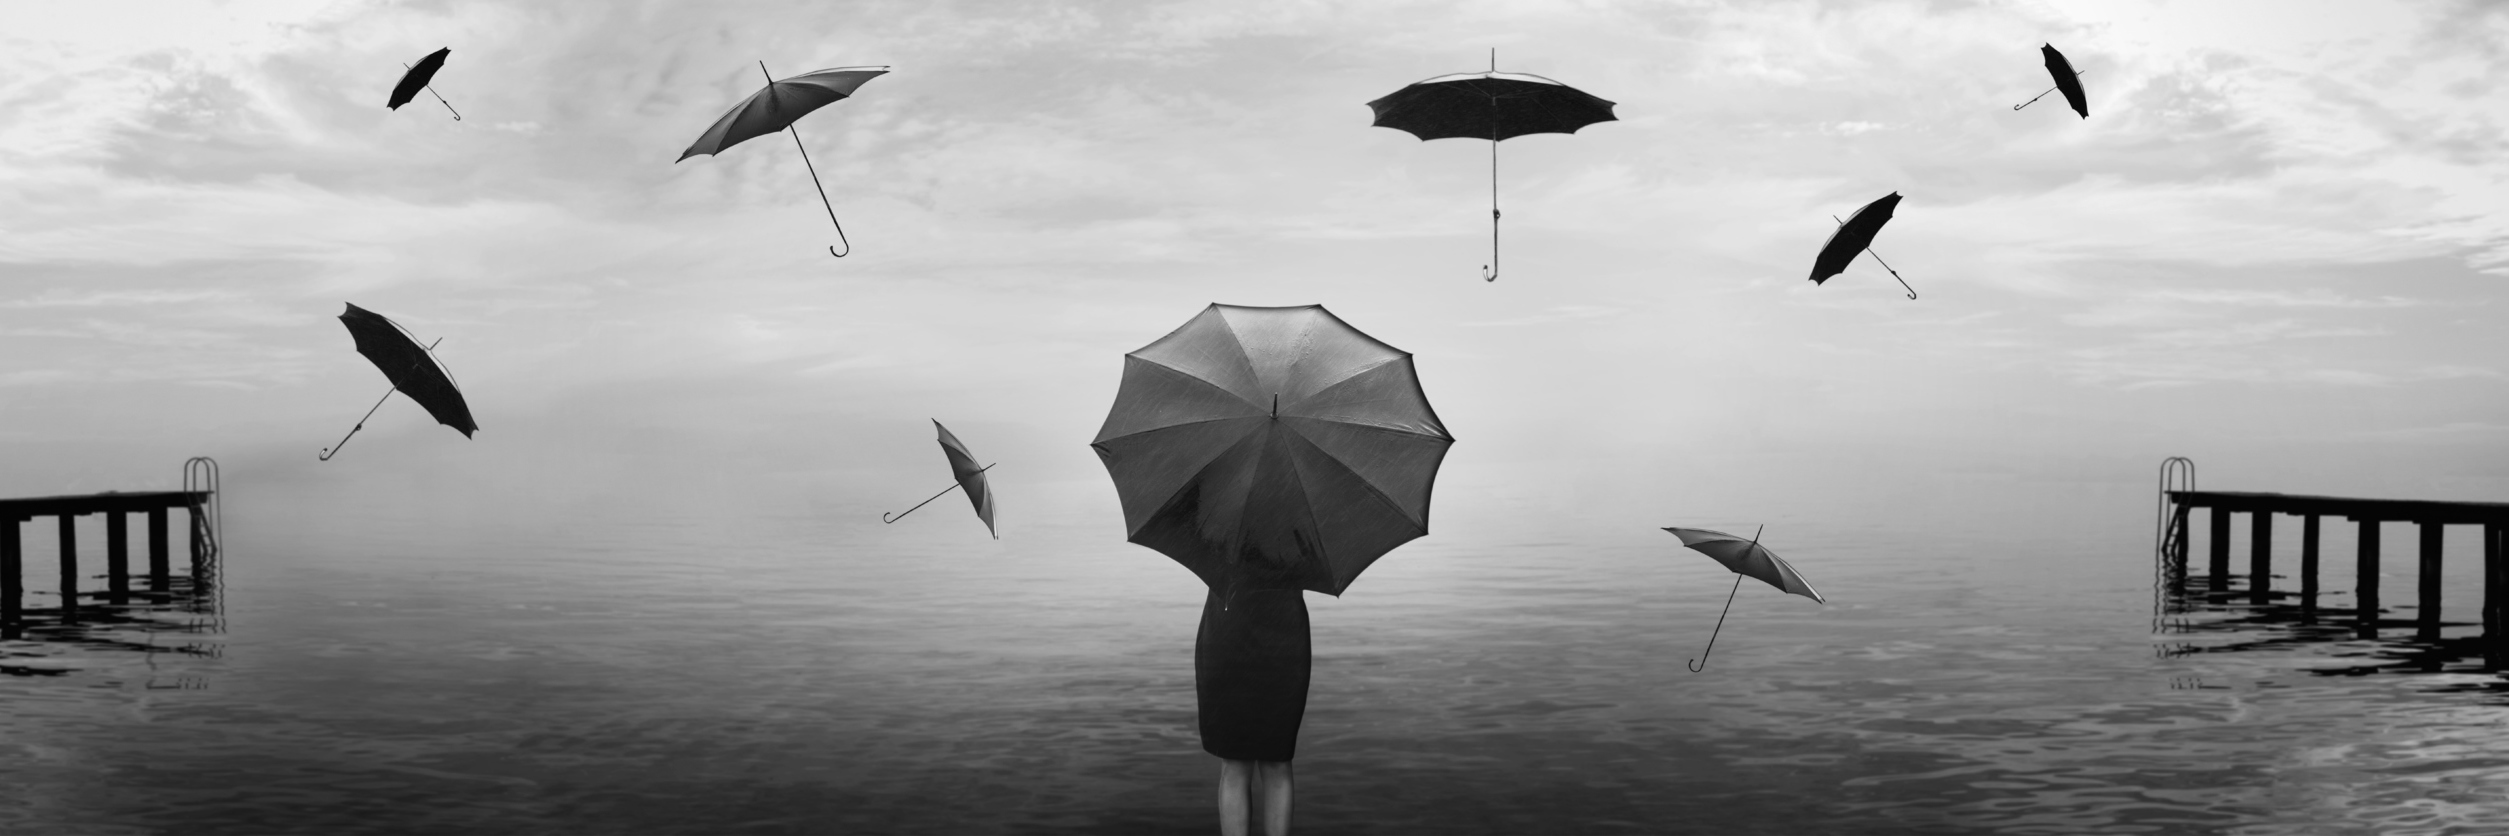 A woman stands at the end of the pier with umbrellas flying around her in the air.